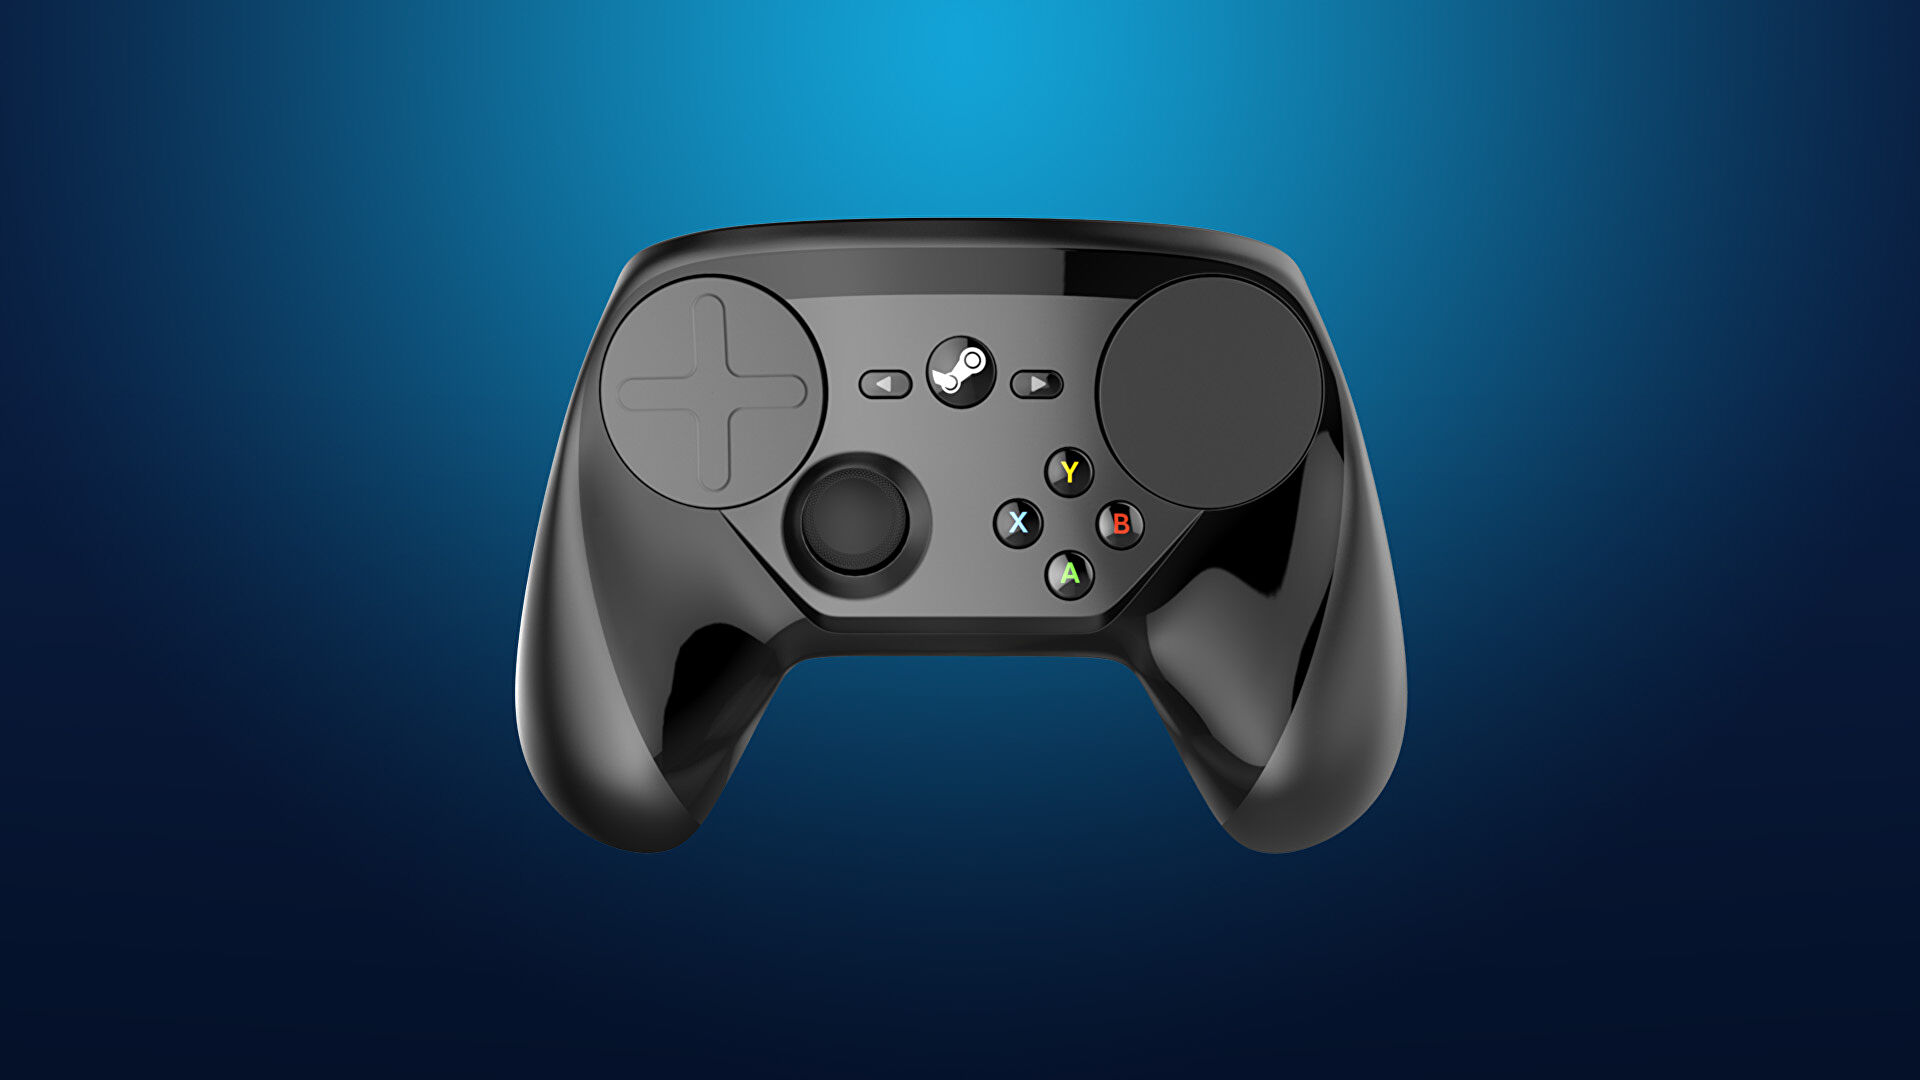 Valve want to make another Steam Controller happen